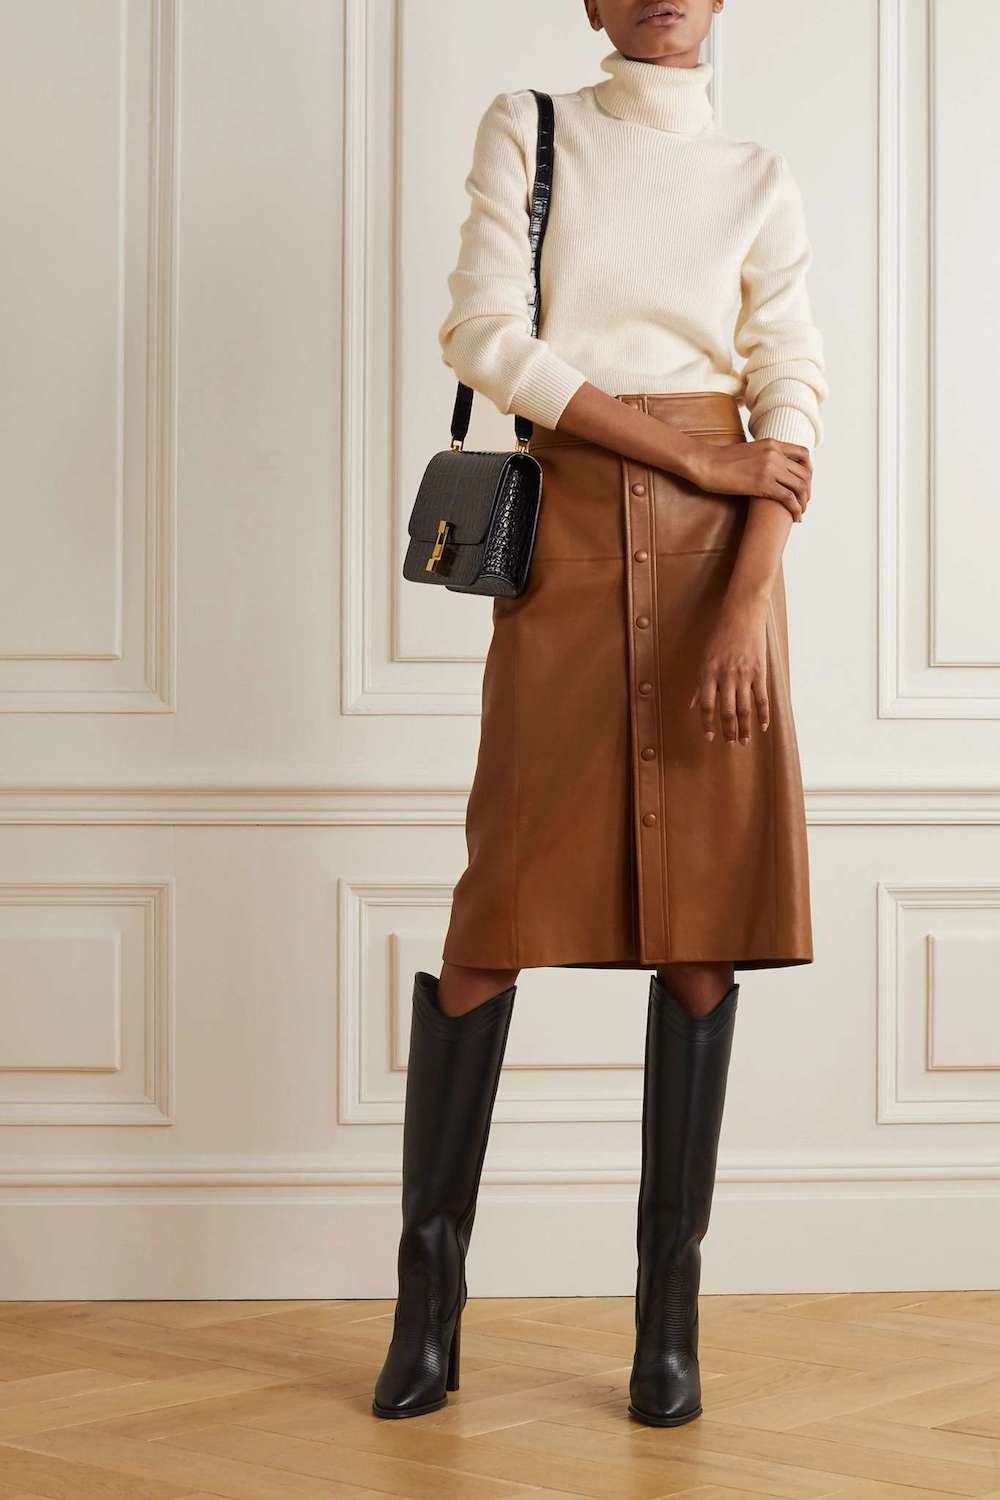 Woman wearing a leather skirt, black boots and a white turtleneck sweater.